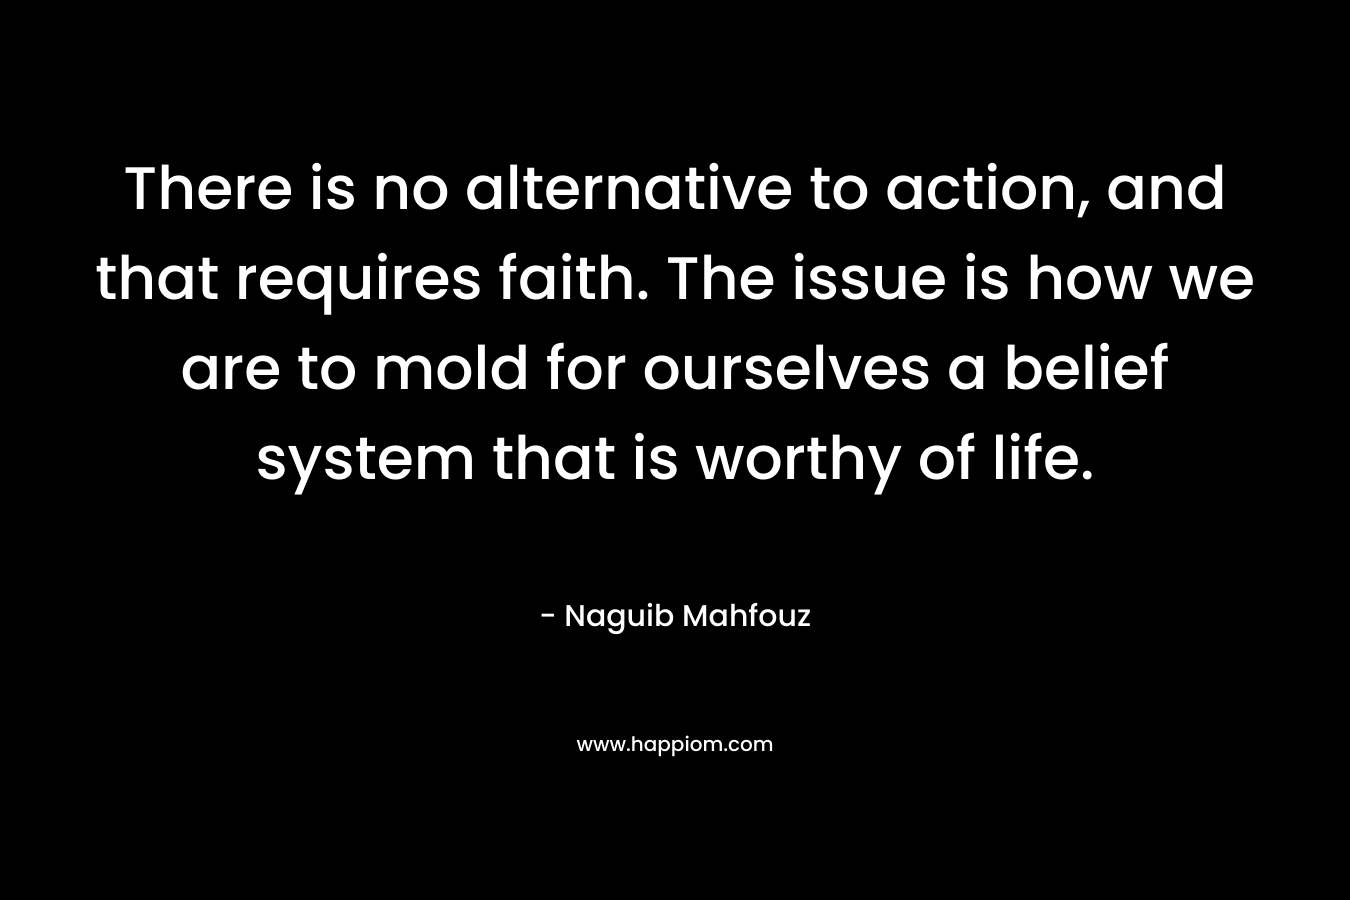 There is no alternative to action, and that requires faith. The issue is how we are to mold for ourselves a belief system that is worthy of life. – Naguib Mahfouz